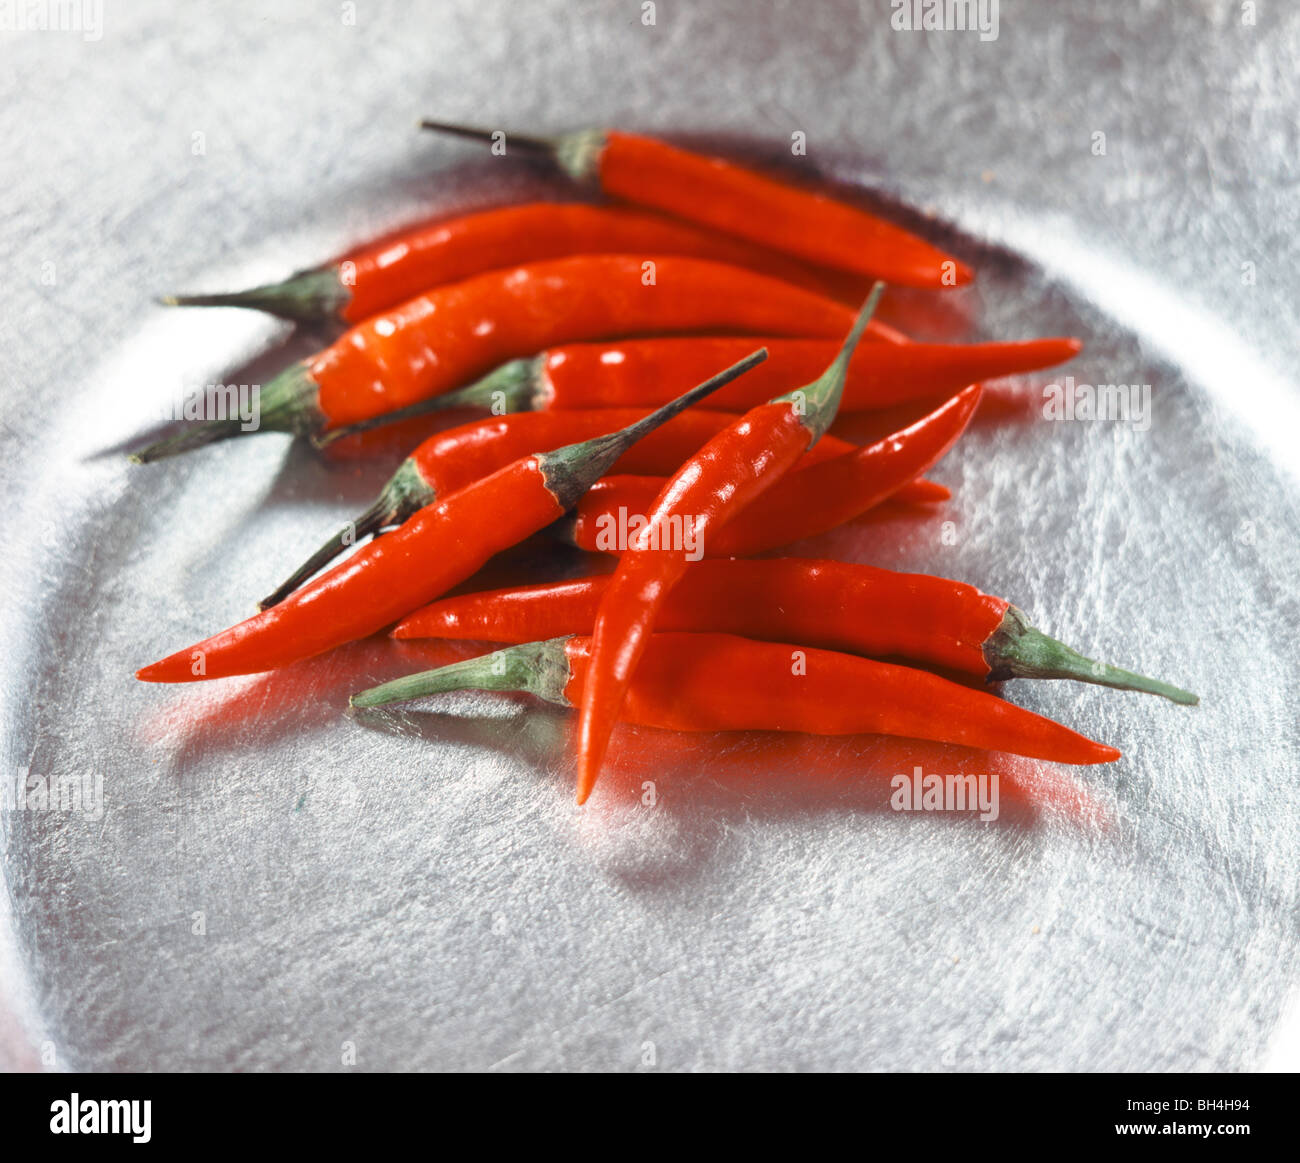 red chillies close up on silver plate indian thai ingredients spices spicy hot Stock Photo